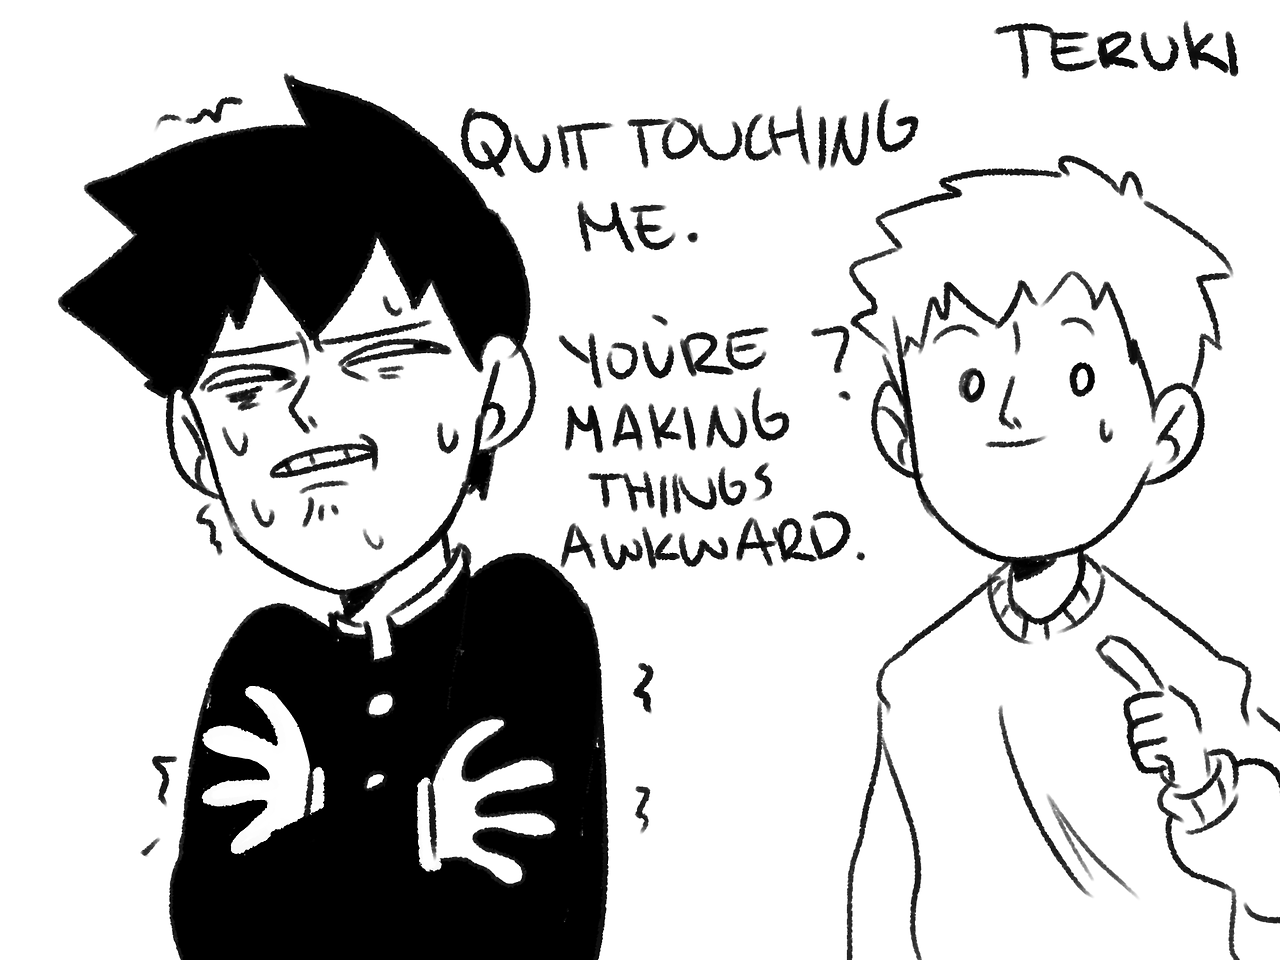 koomaart:  @ligs-is-a-turd and i were talking about how ritsu would react to others